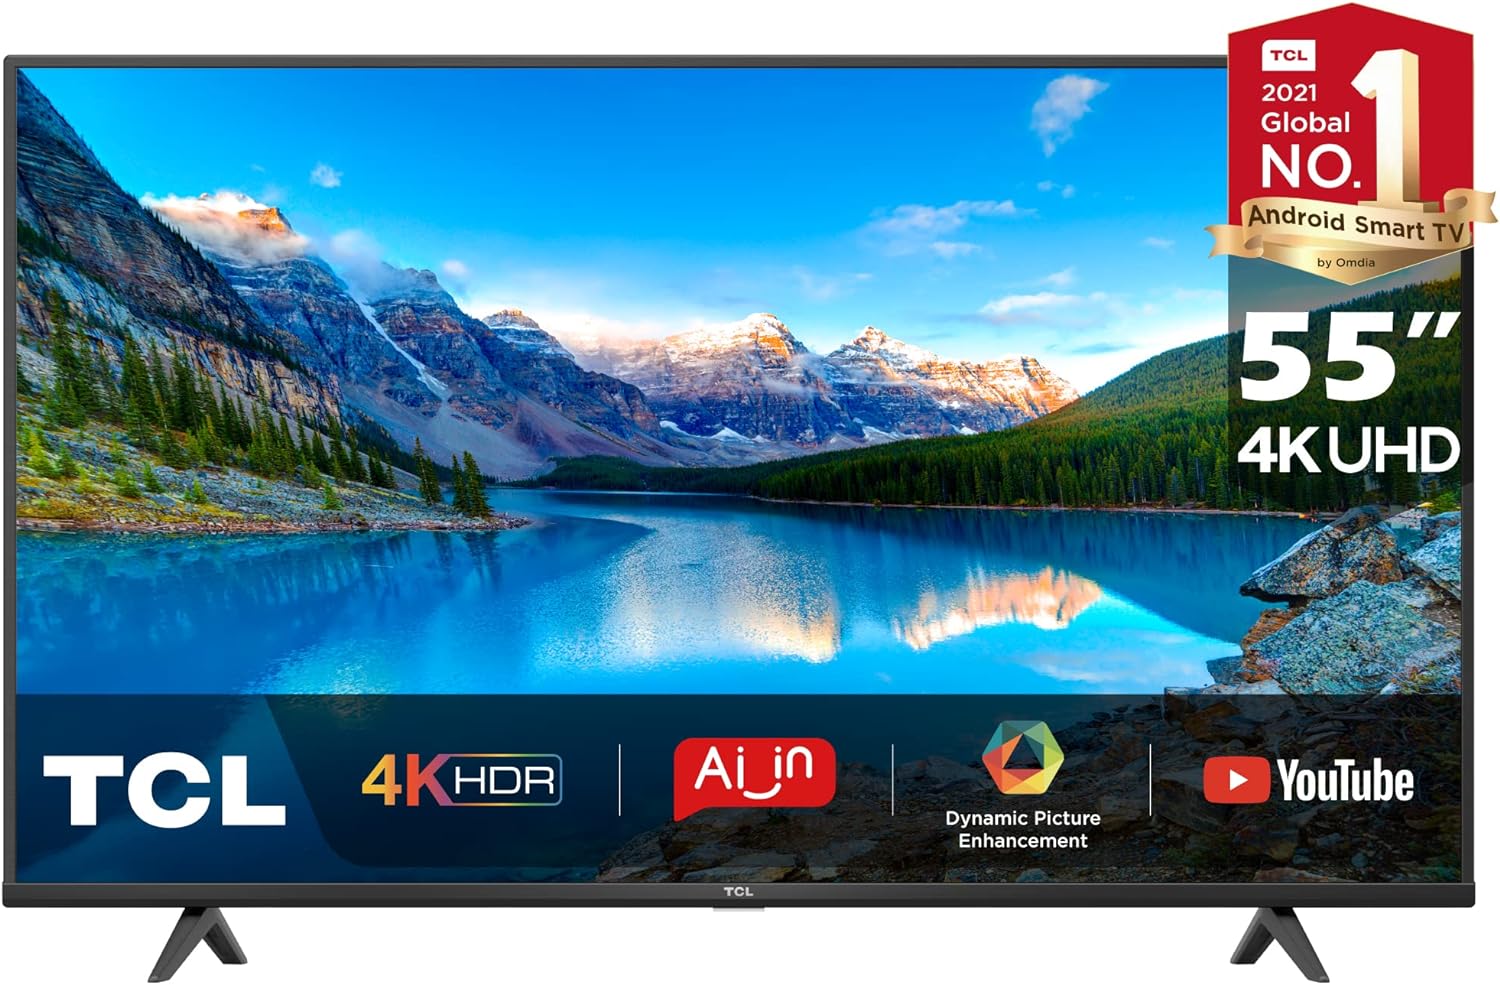 TCL 55 Inch TV Smart 4K HDR Certified Android - 55P615